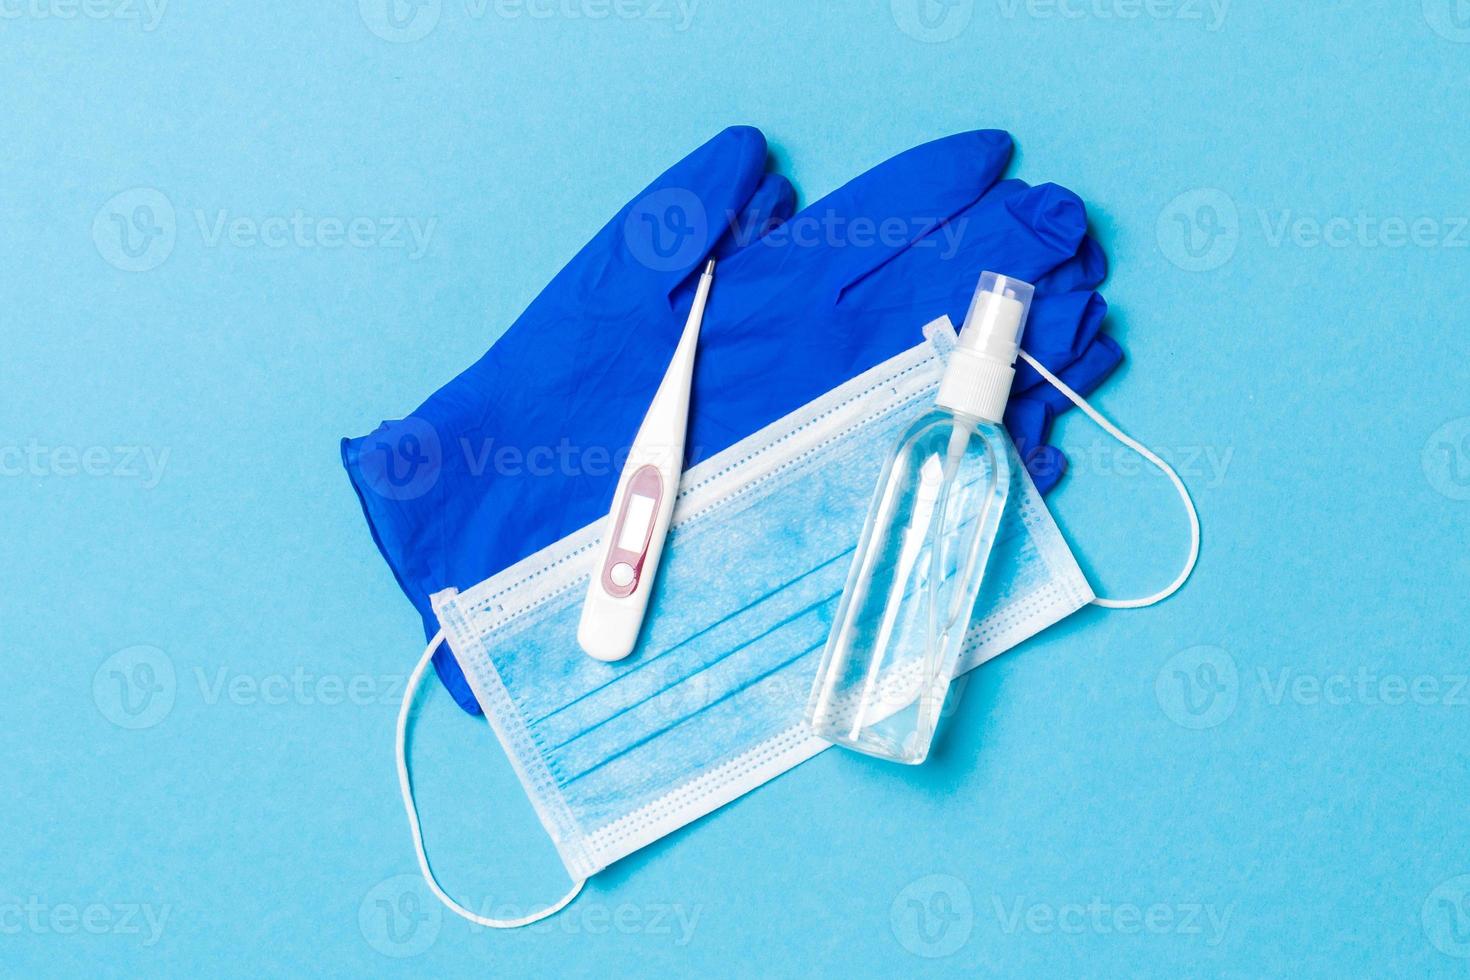 Top view of latex gloves, bottle of alcohol hand sanitizes, medical mask and digital thermometer on blue background. Antibacterial virus protection concept with copy space photo